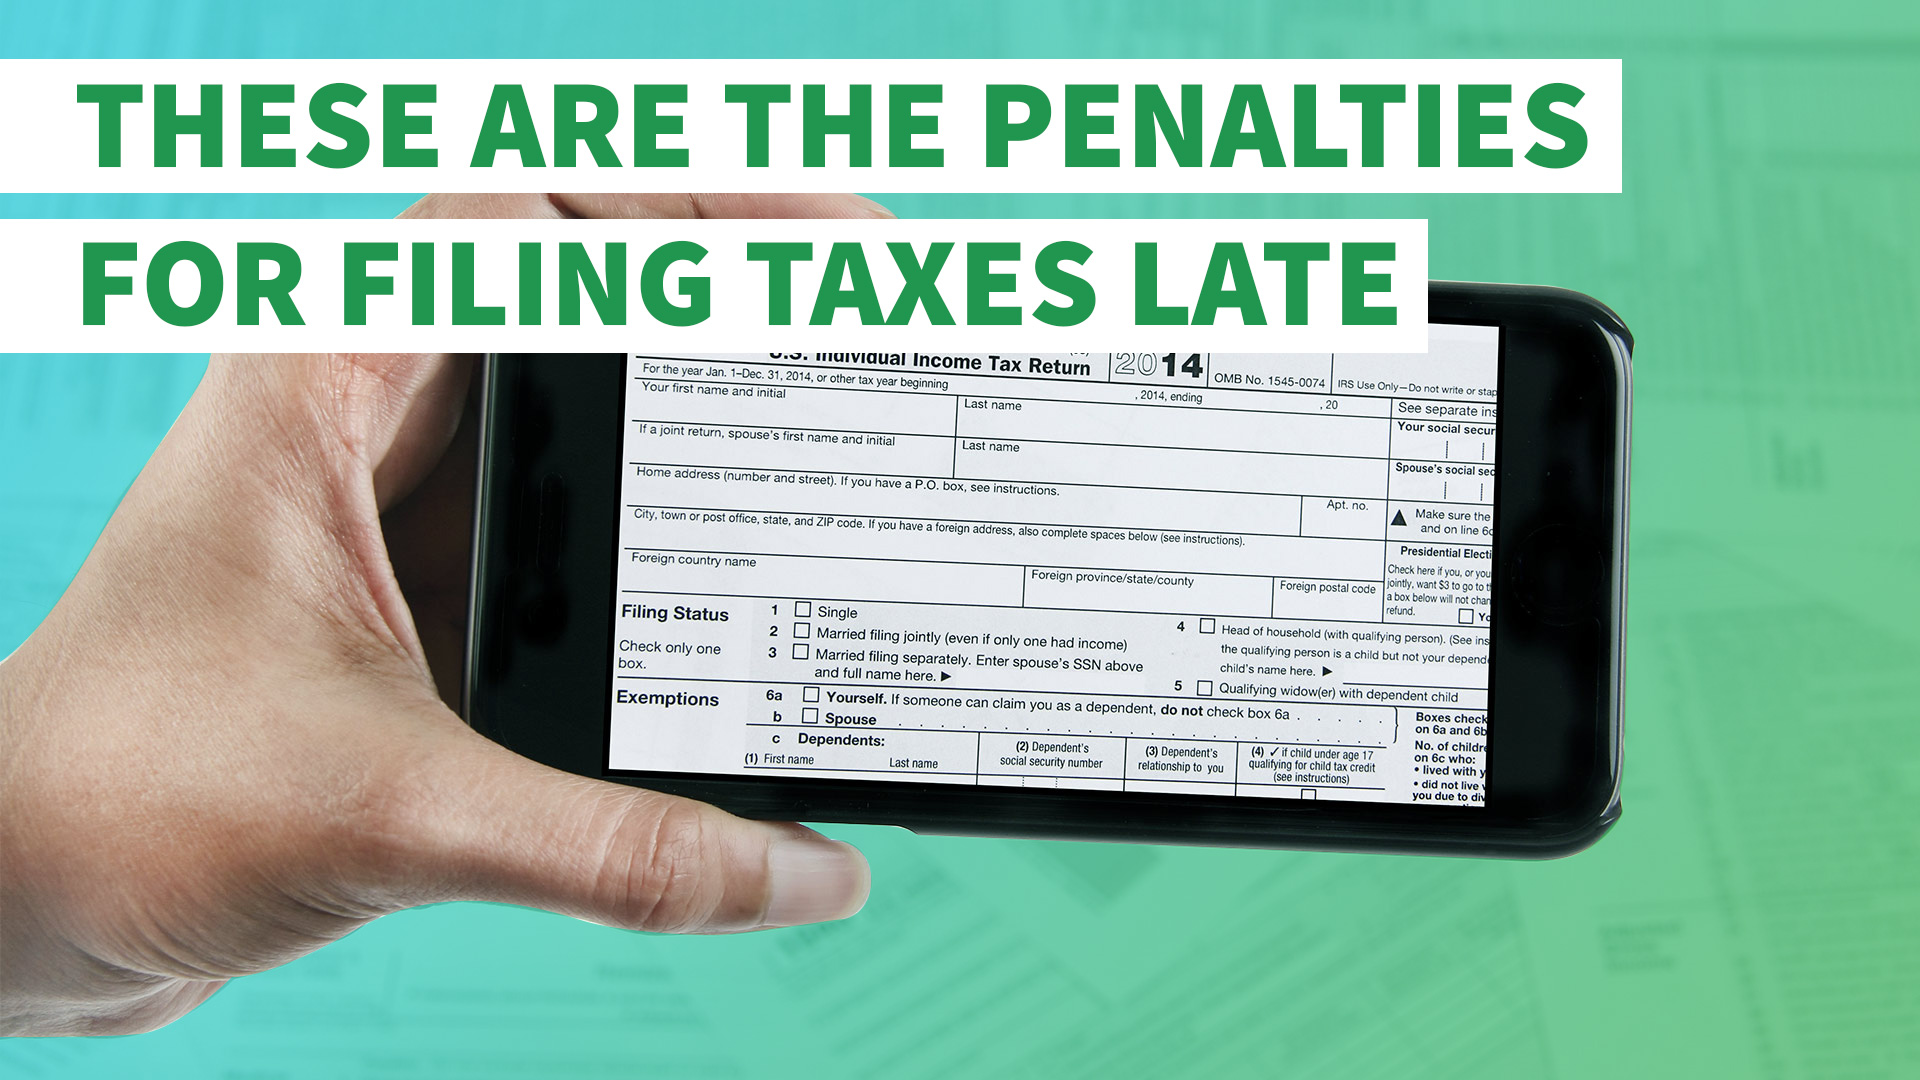 Does the IRS have an online tax penalty calculator?